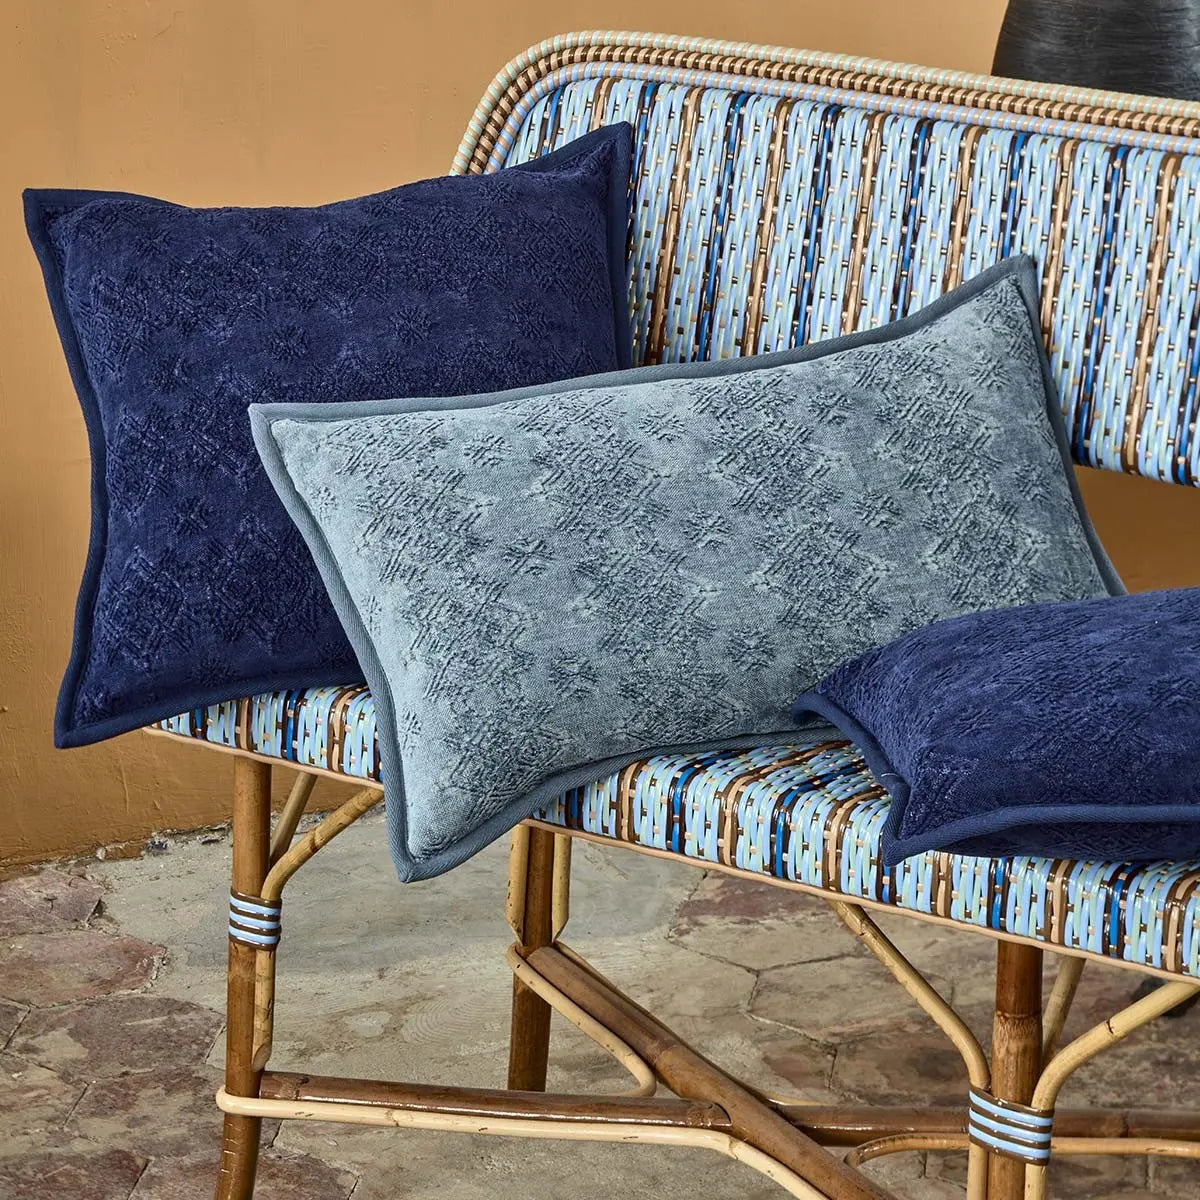 Yves Delorme Syracuse Decorative Pillows in Zinc and Indigo on a bench